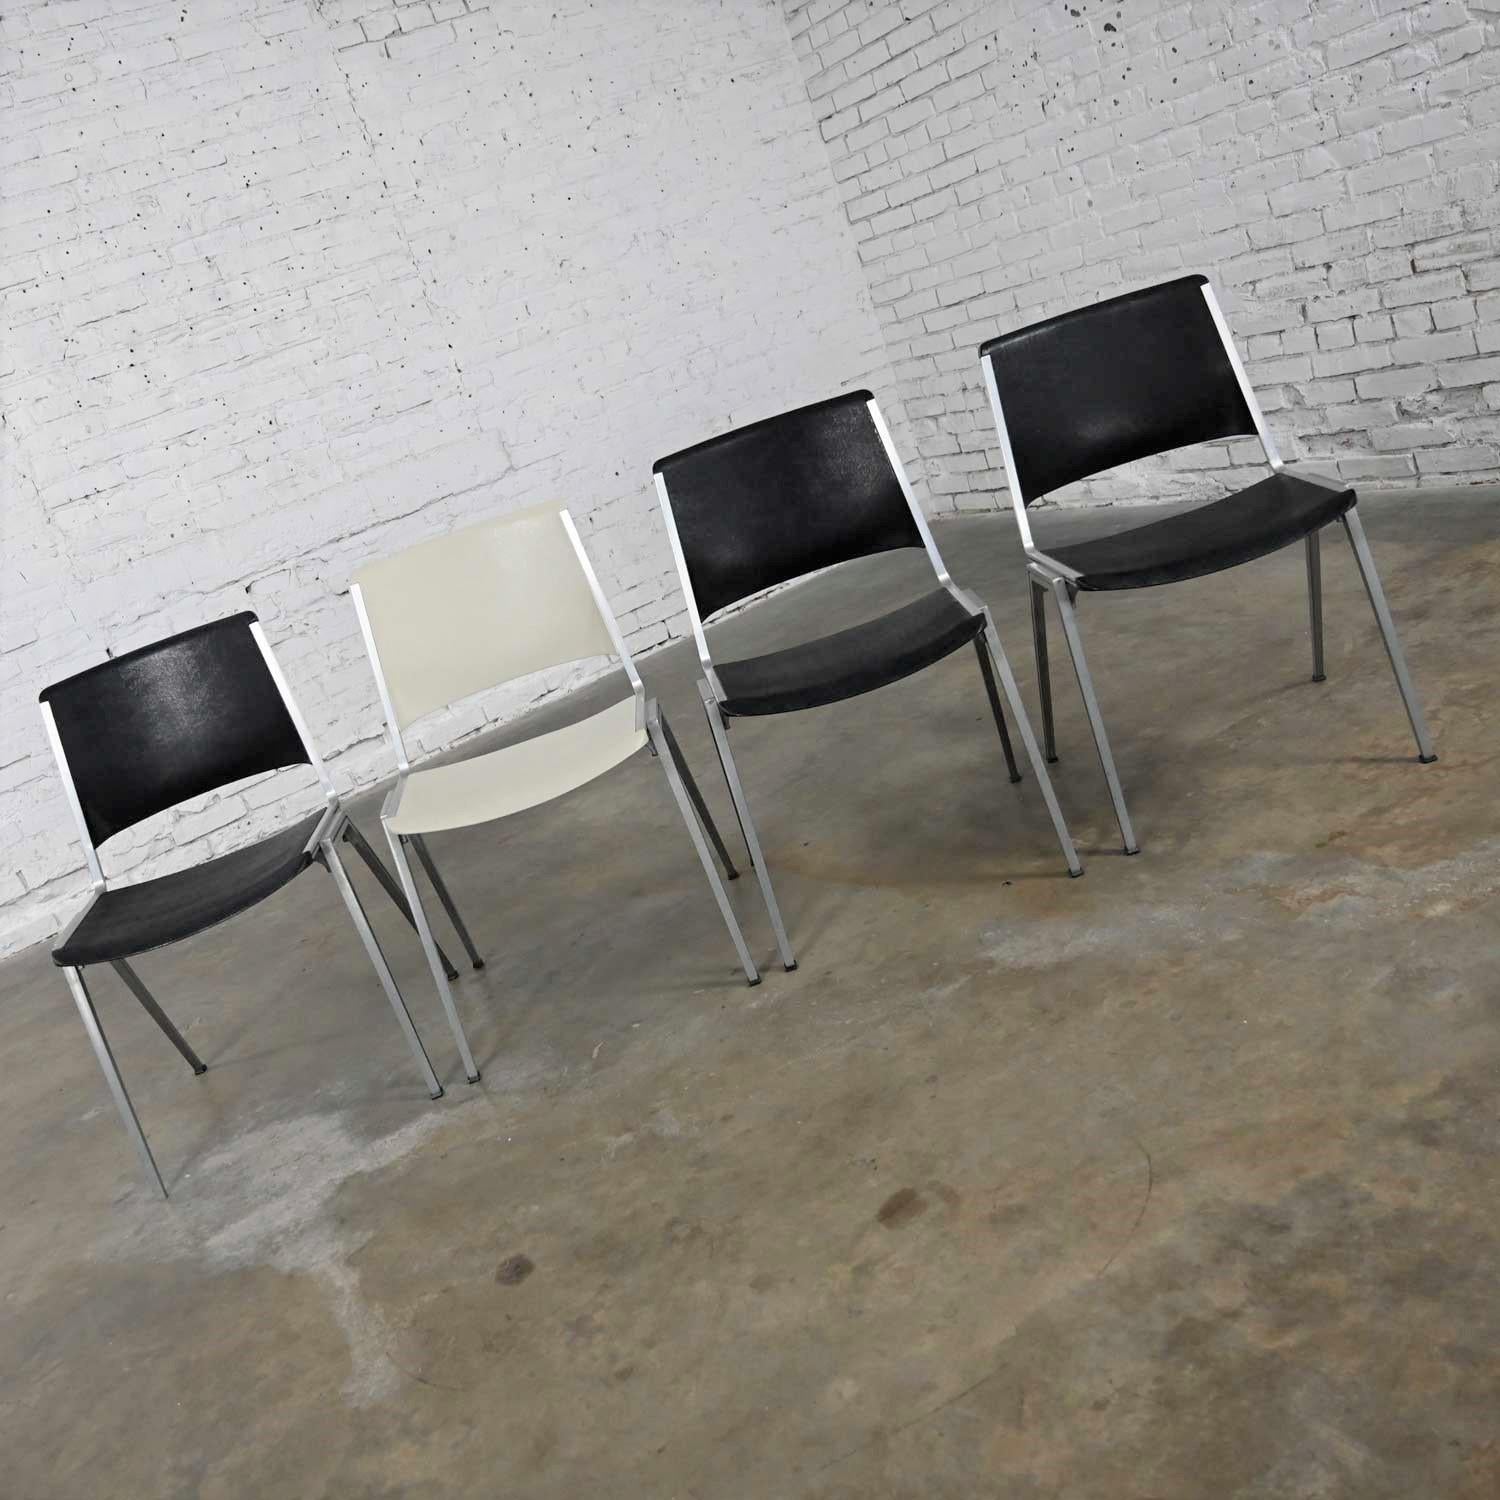 20th Century Vintage Aluminum Steelcase Stacking Chairs Model #1278 1 White 3 Black Set of 4 For Sale